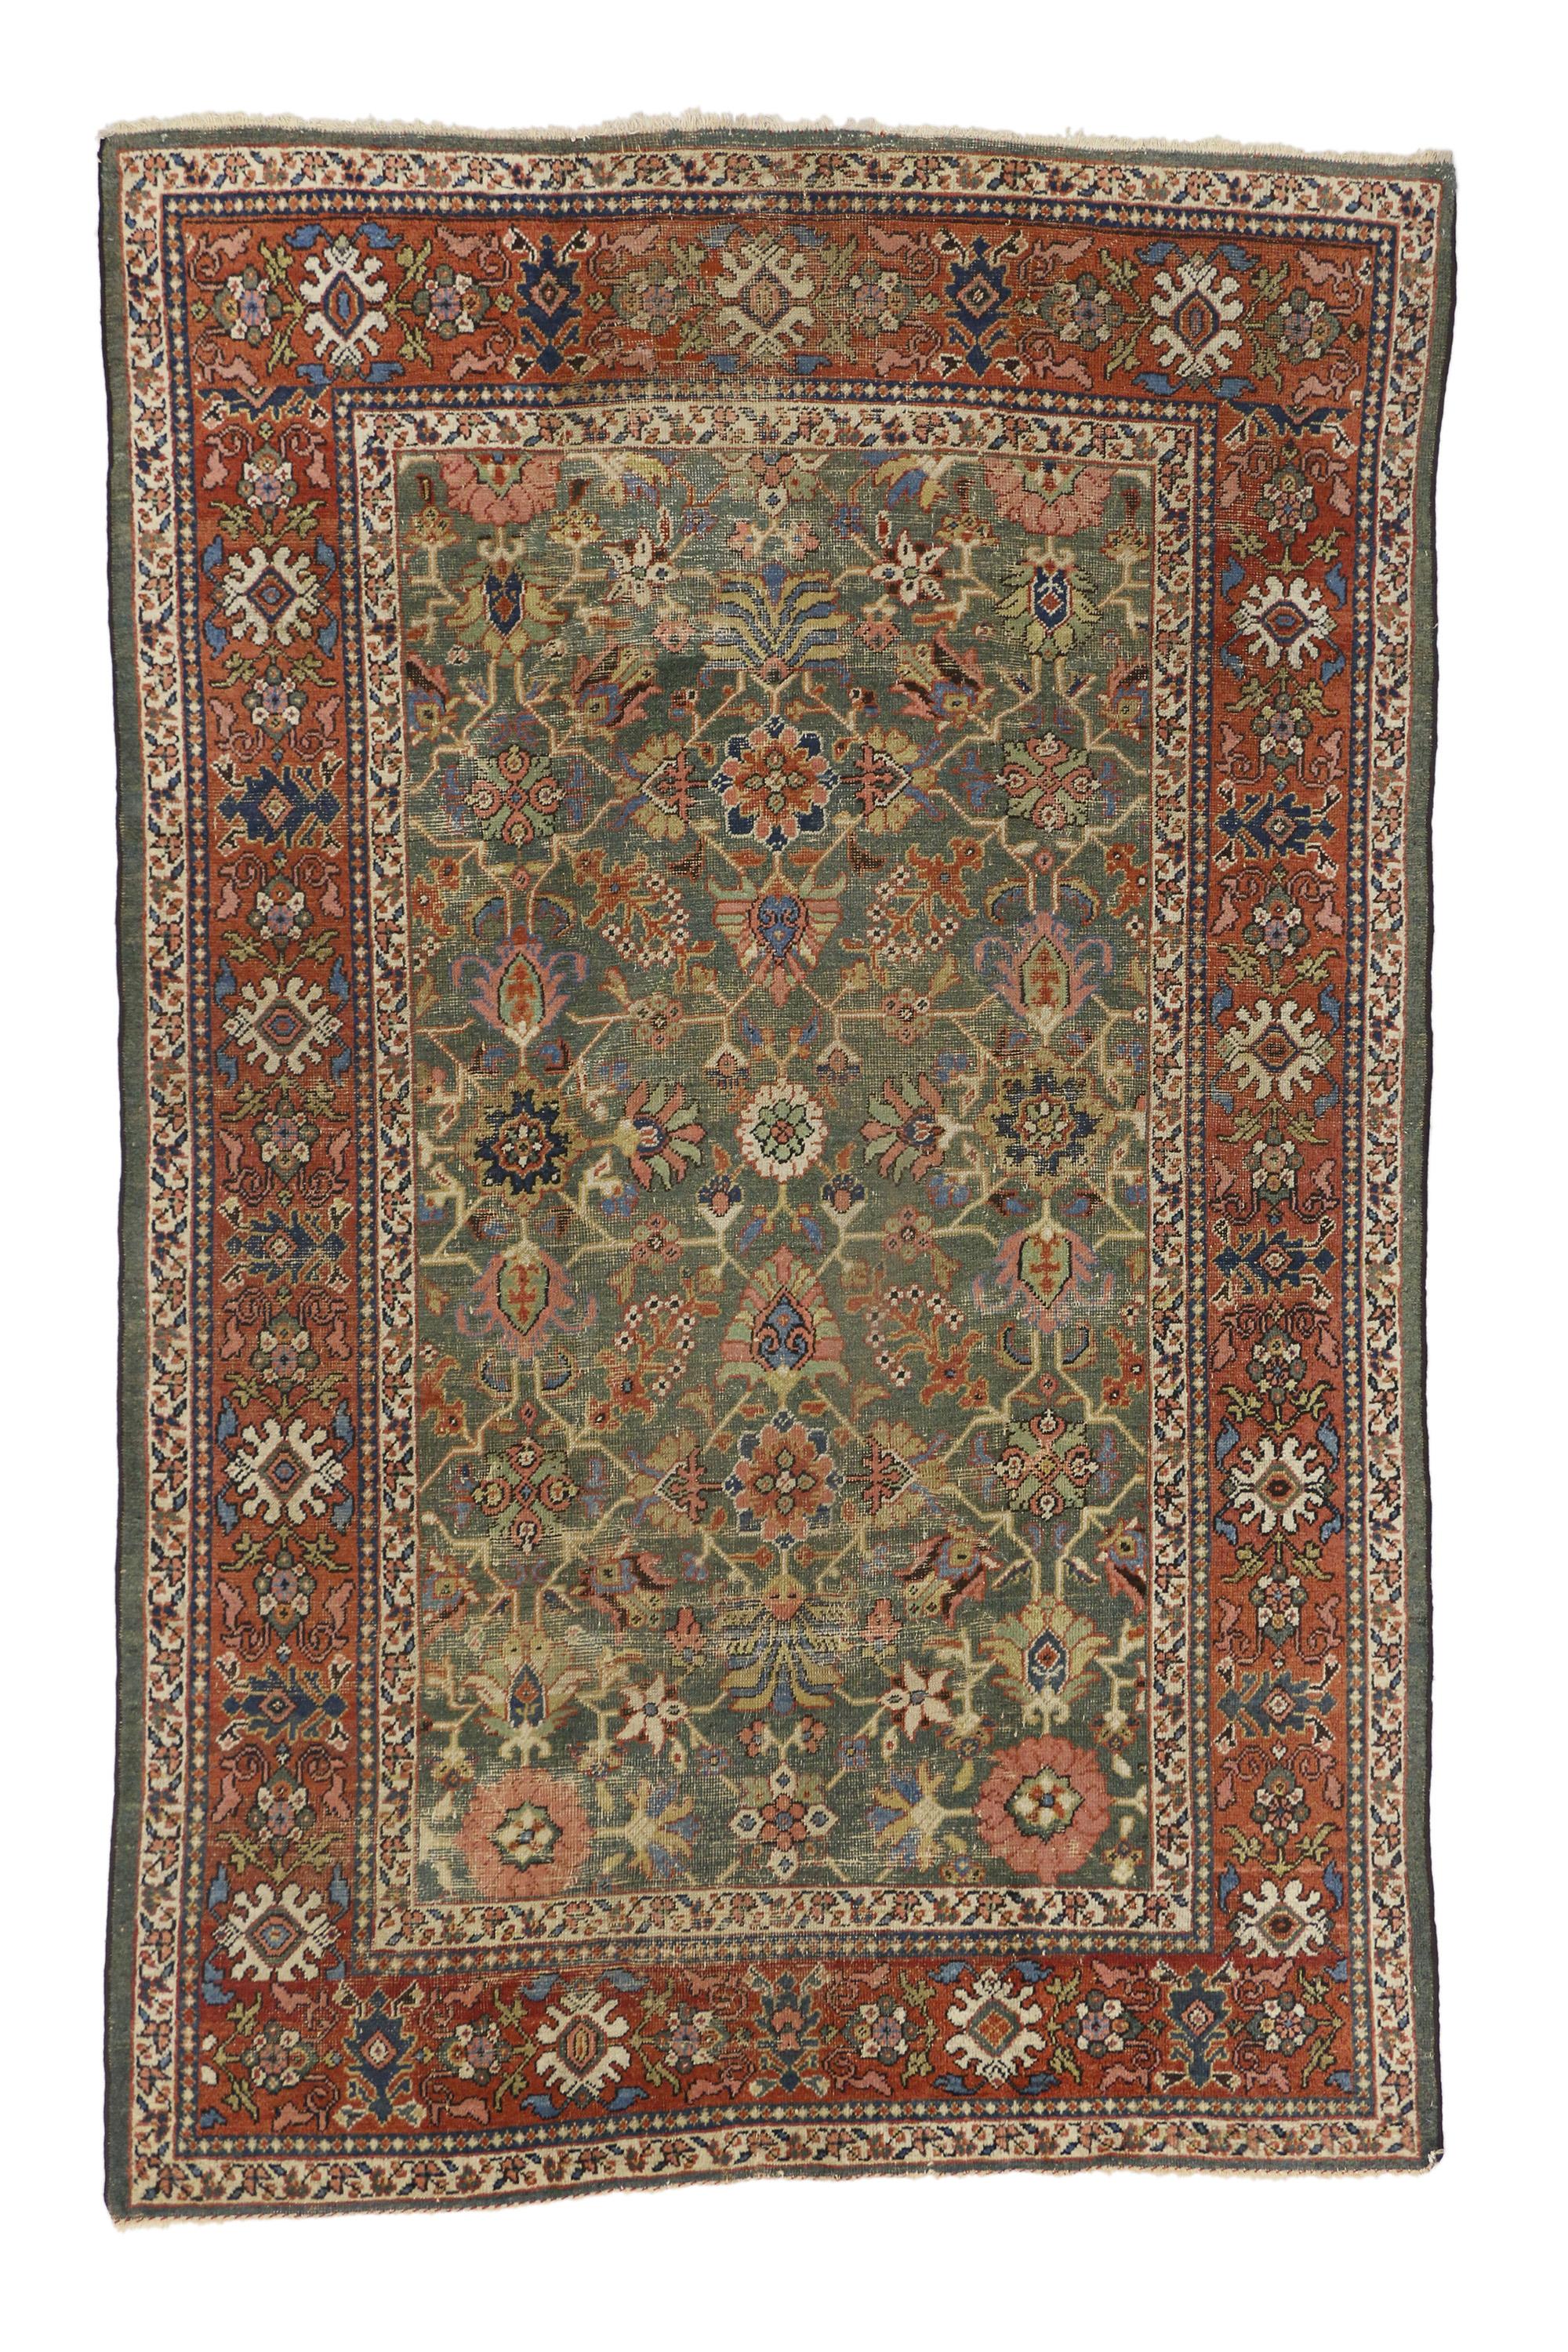 19th Century Distressed Antique Persian Sultanabad Rug with Rustic Arts and Crafts Style For Sale